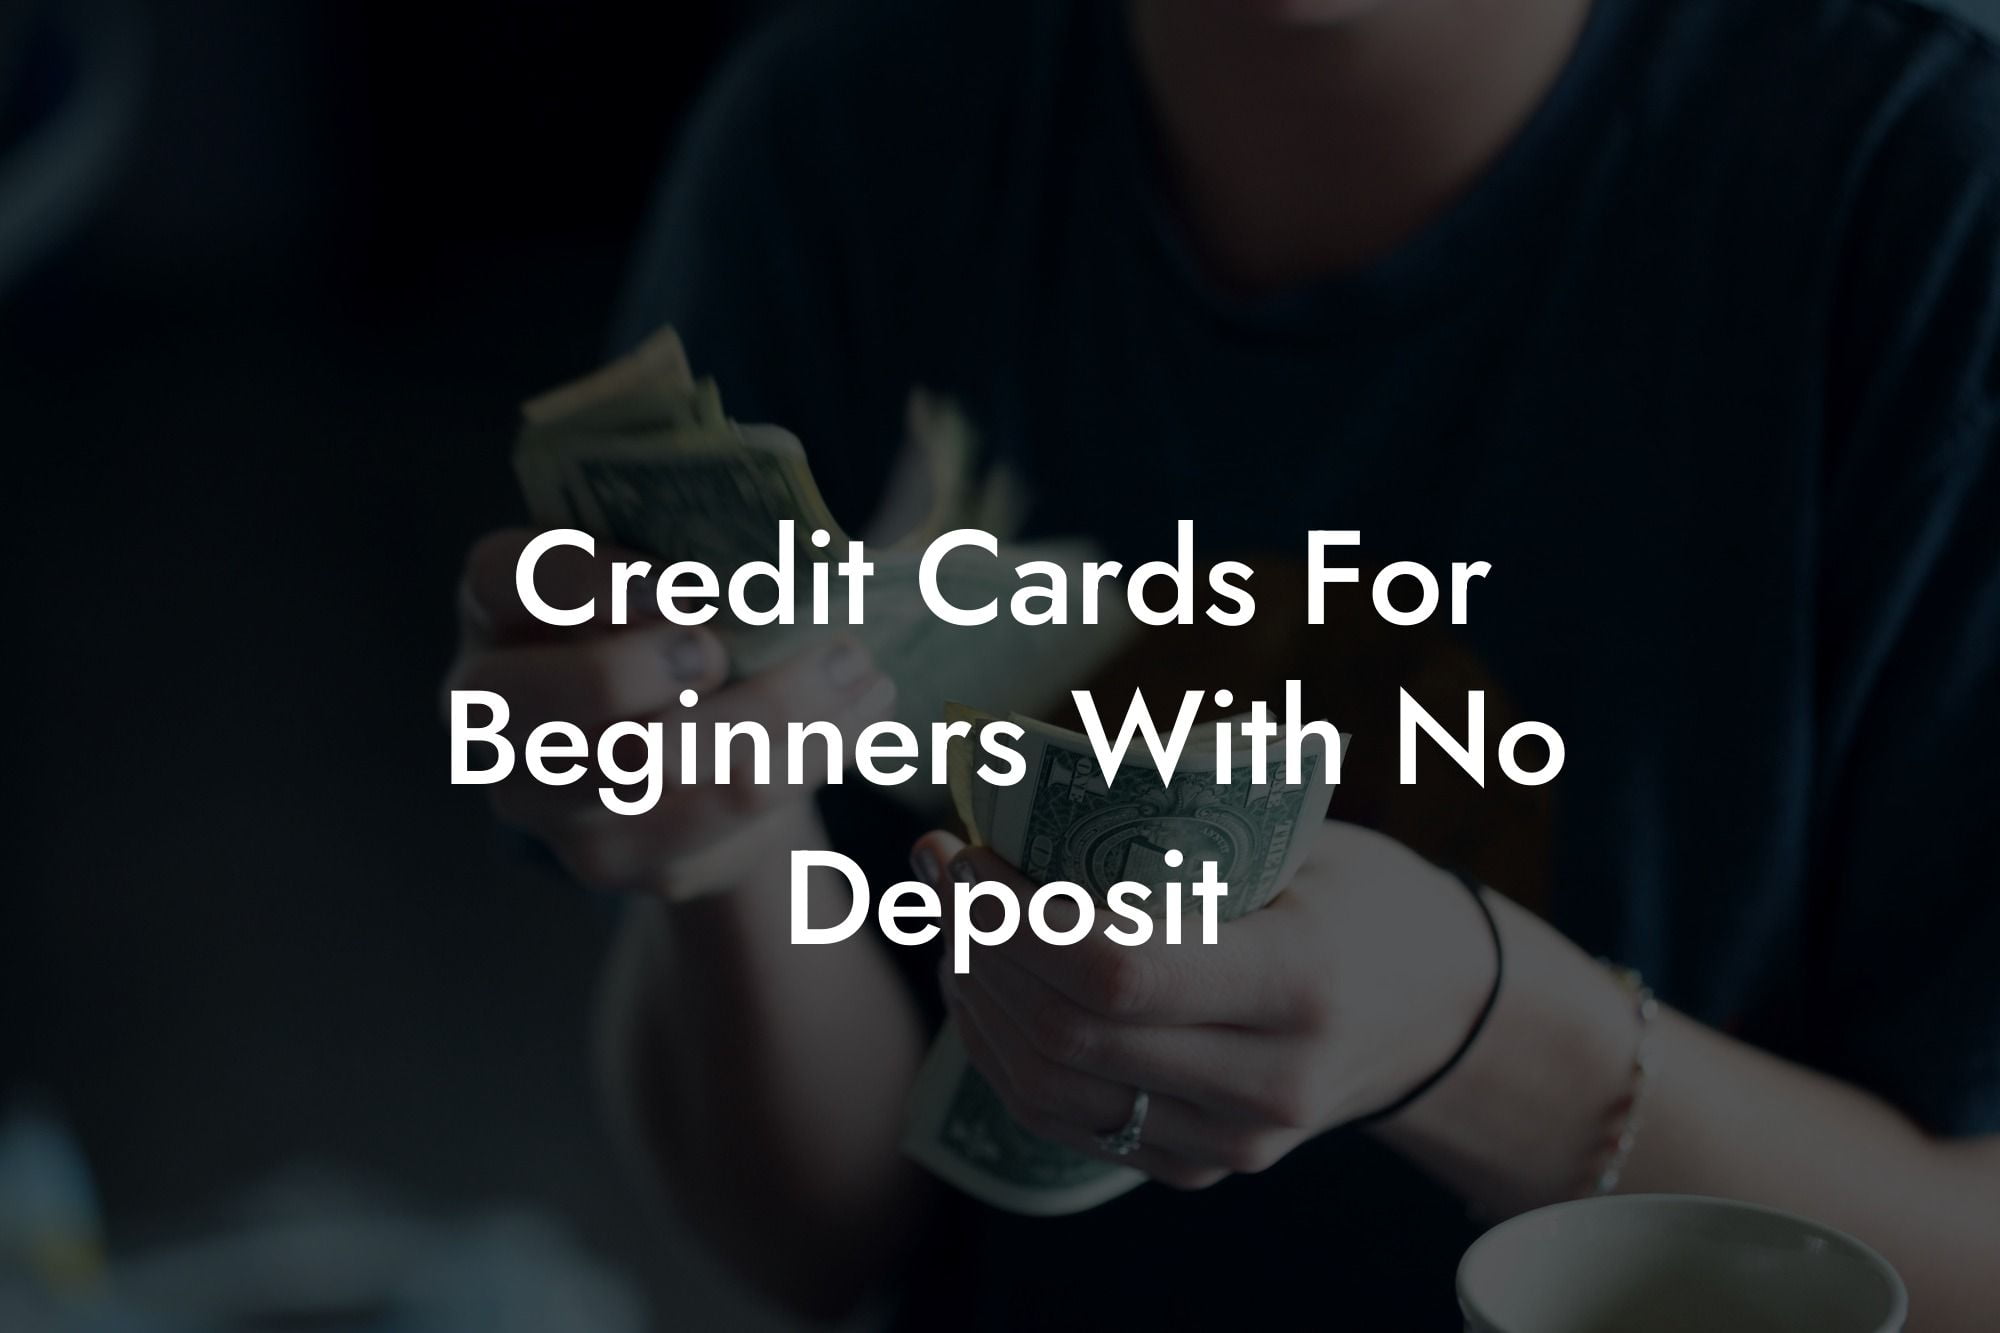 Credit Cards For Beginners With No Deposit